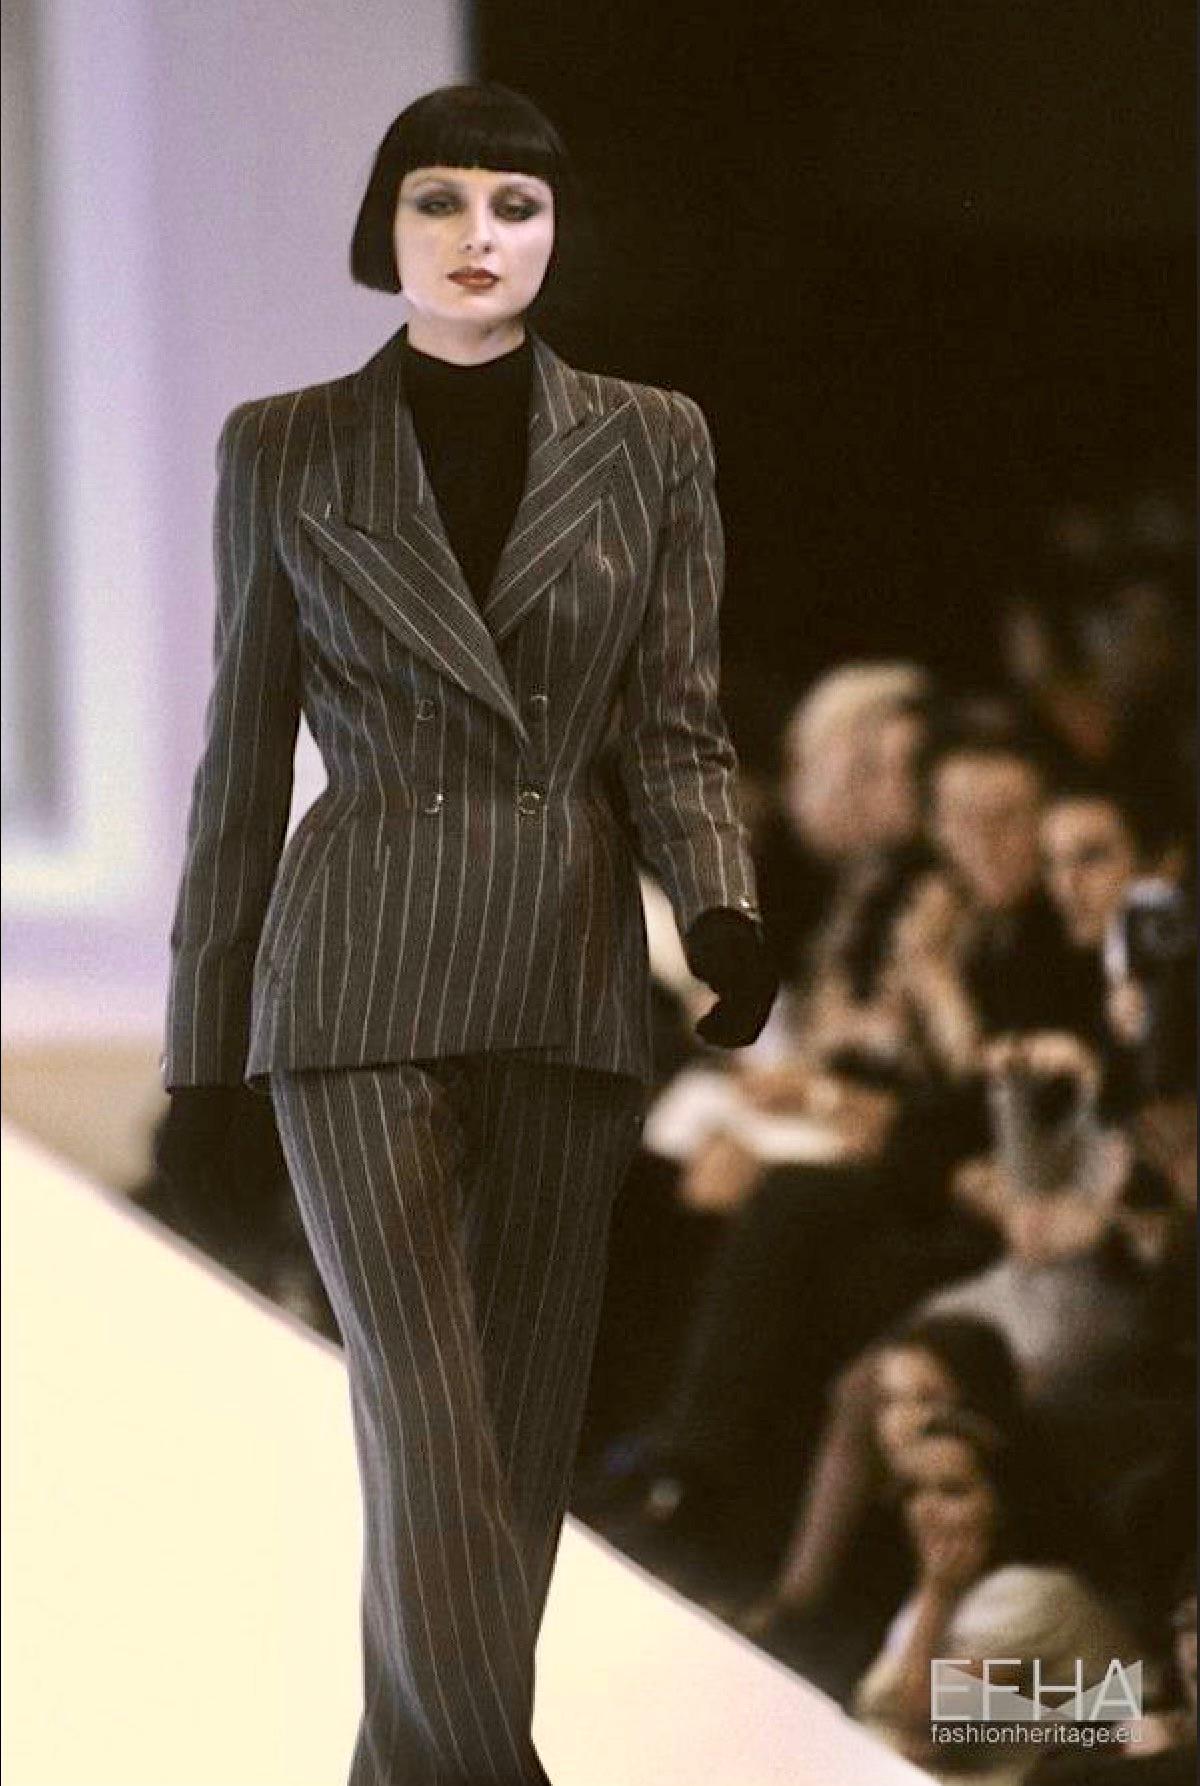 Presenting a striking dark green power suit designed by Manfred Thierry Mugler for his Fall/Winter 1998 collection, with a similar suit debuting on the season's runway. The jacket features an oversized peak lapel and a double-breasted snap closure.